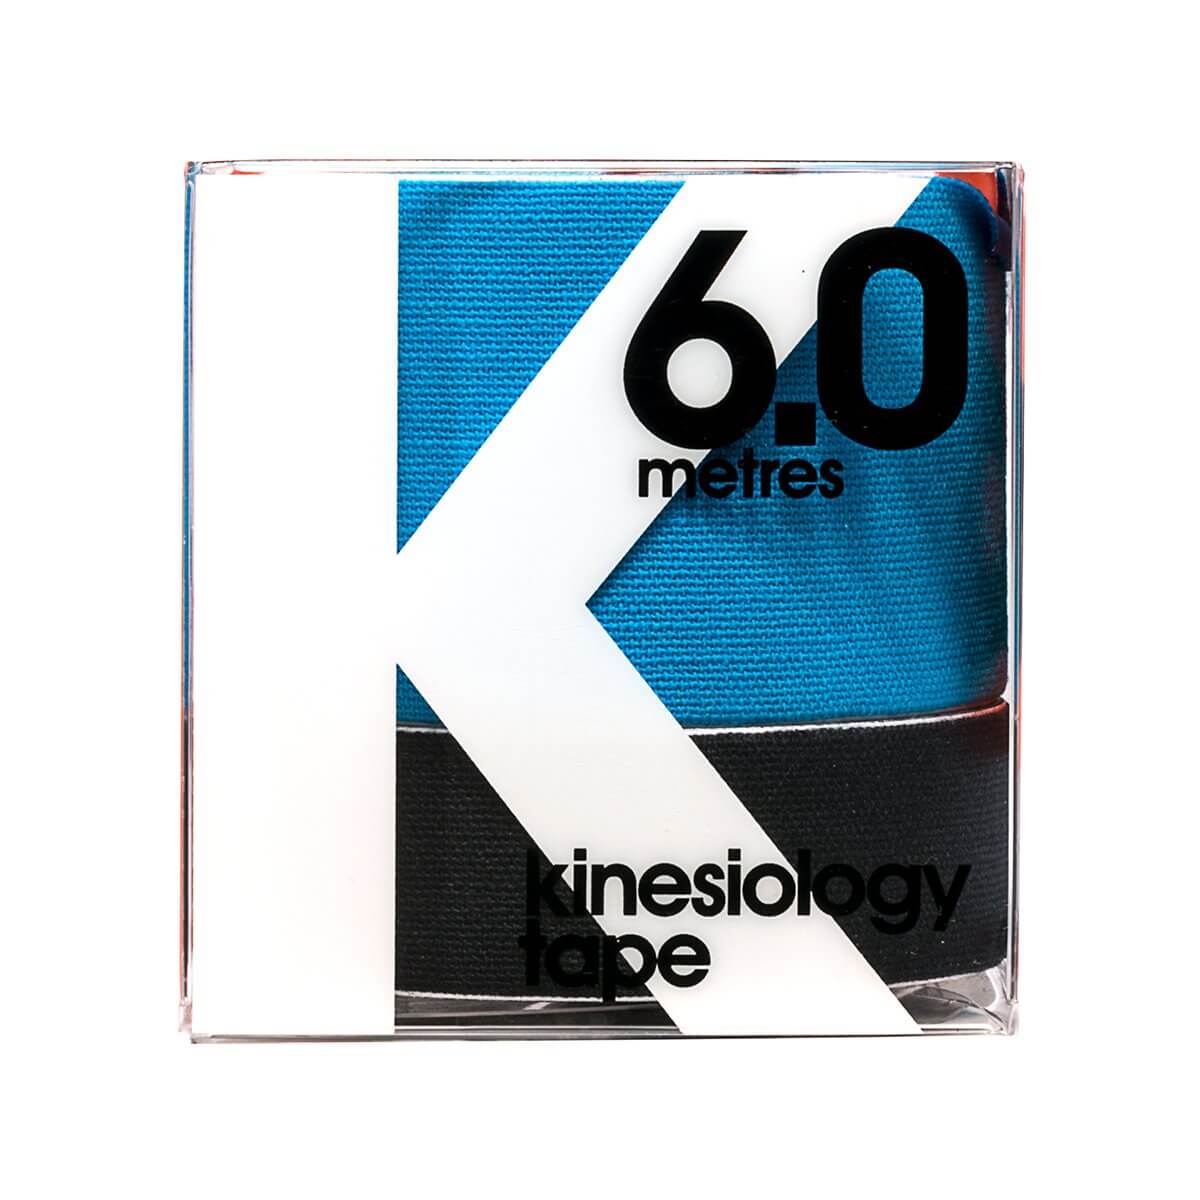 K6.0 kinesiology tape - Double roll 2 inches x 20 ft.